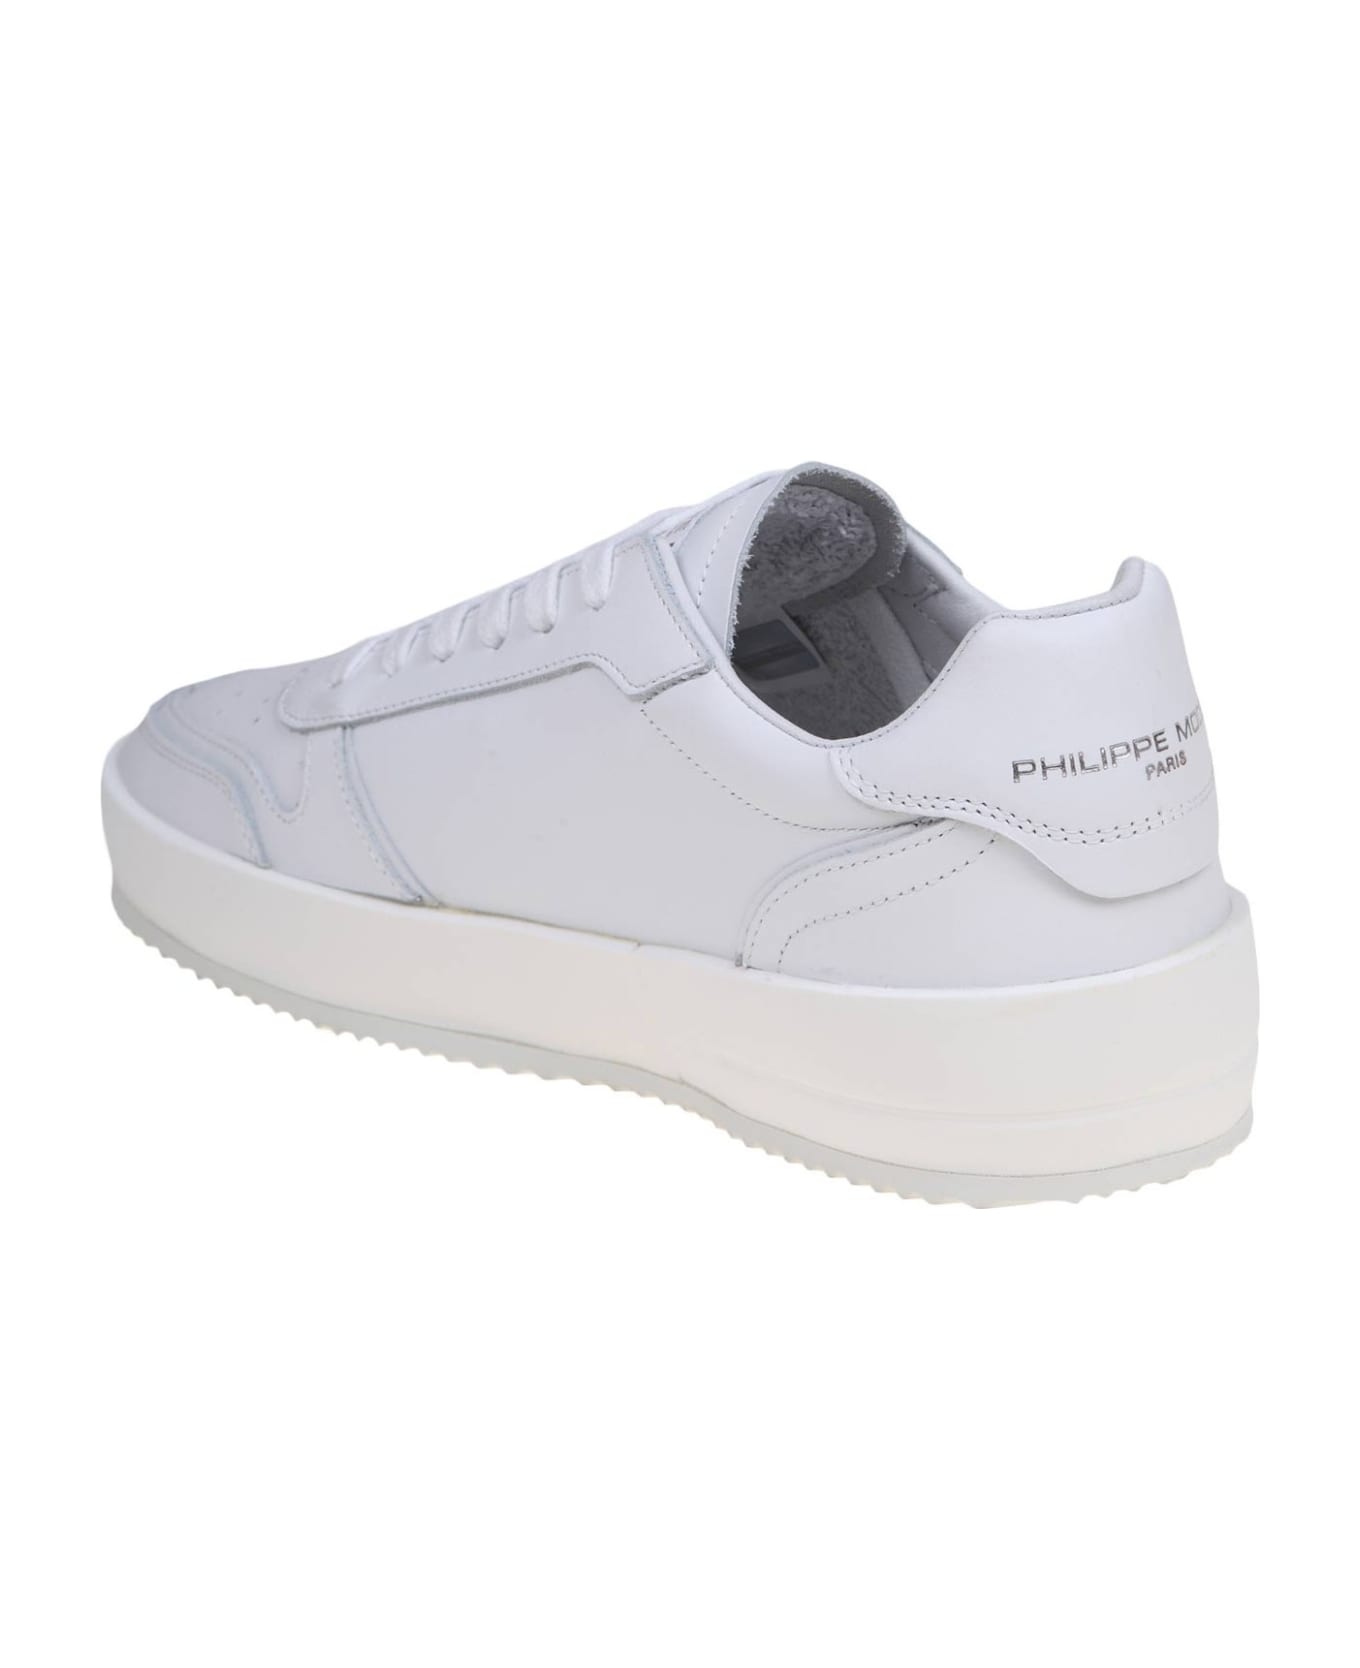 Philippe Model Nice Low White Leather Sneakers - WHITE スニーカー